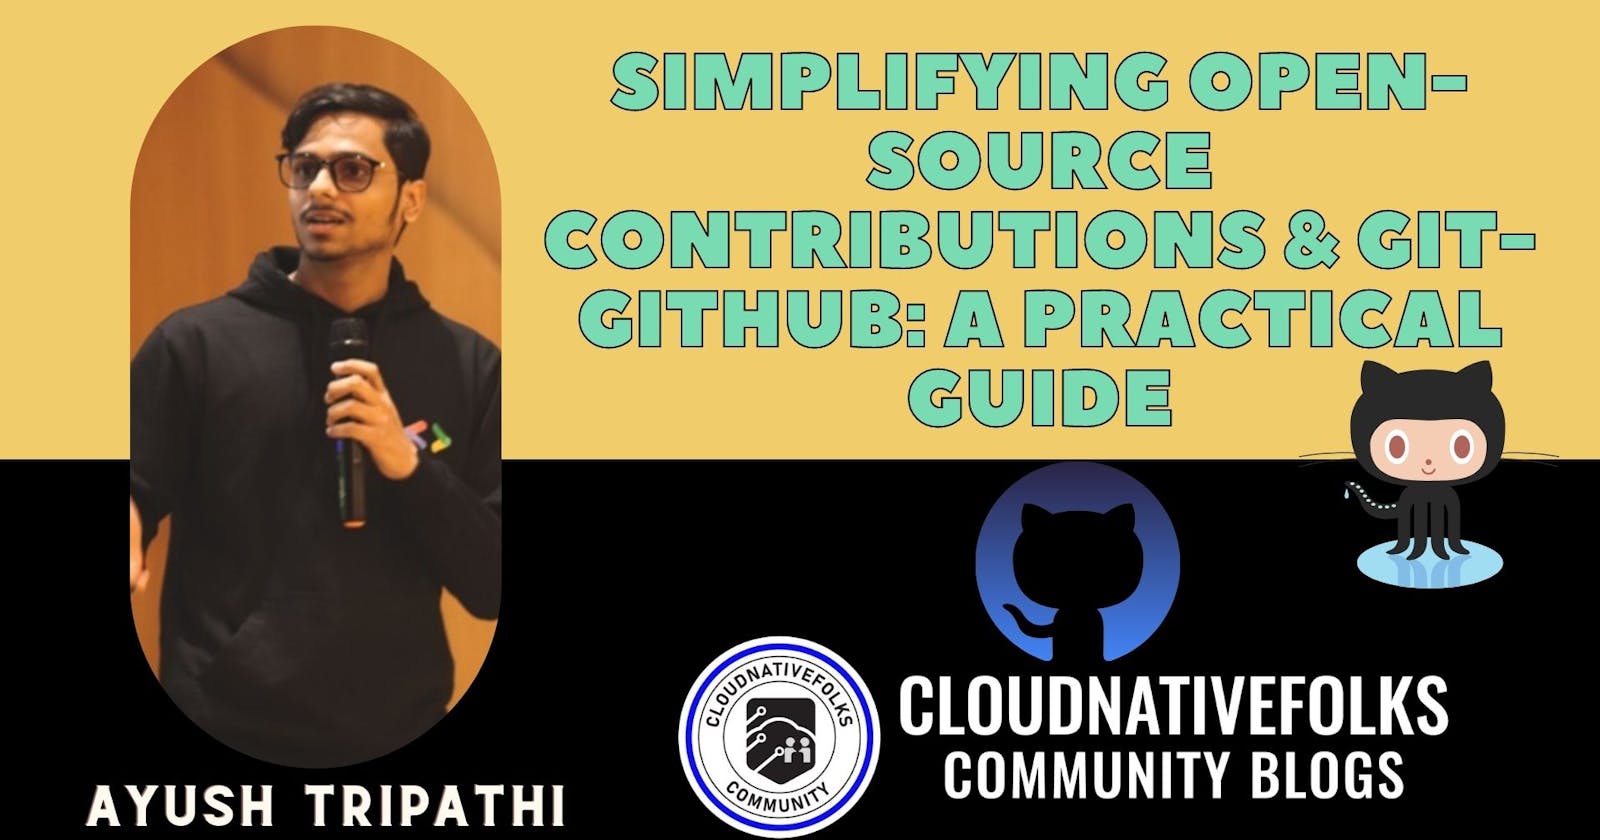 Simplifying open-source contributions & Git-GitHub: A Practical Guide